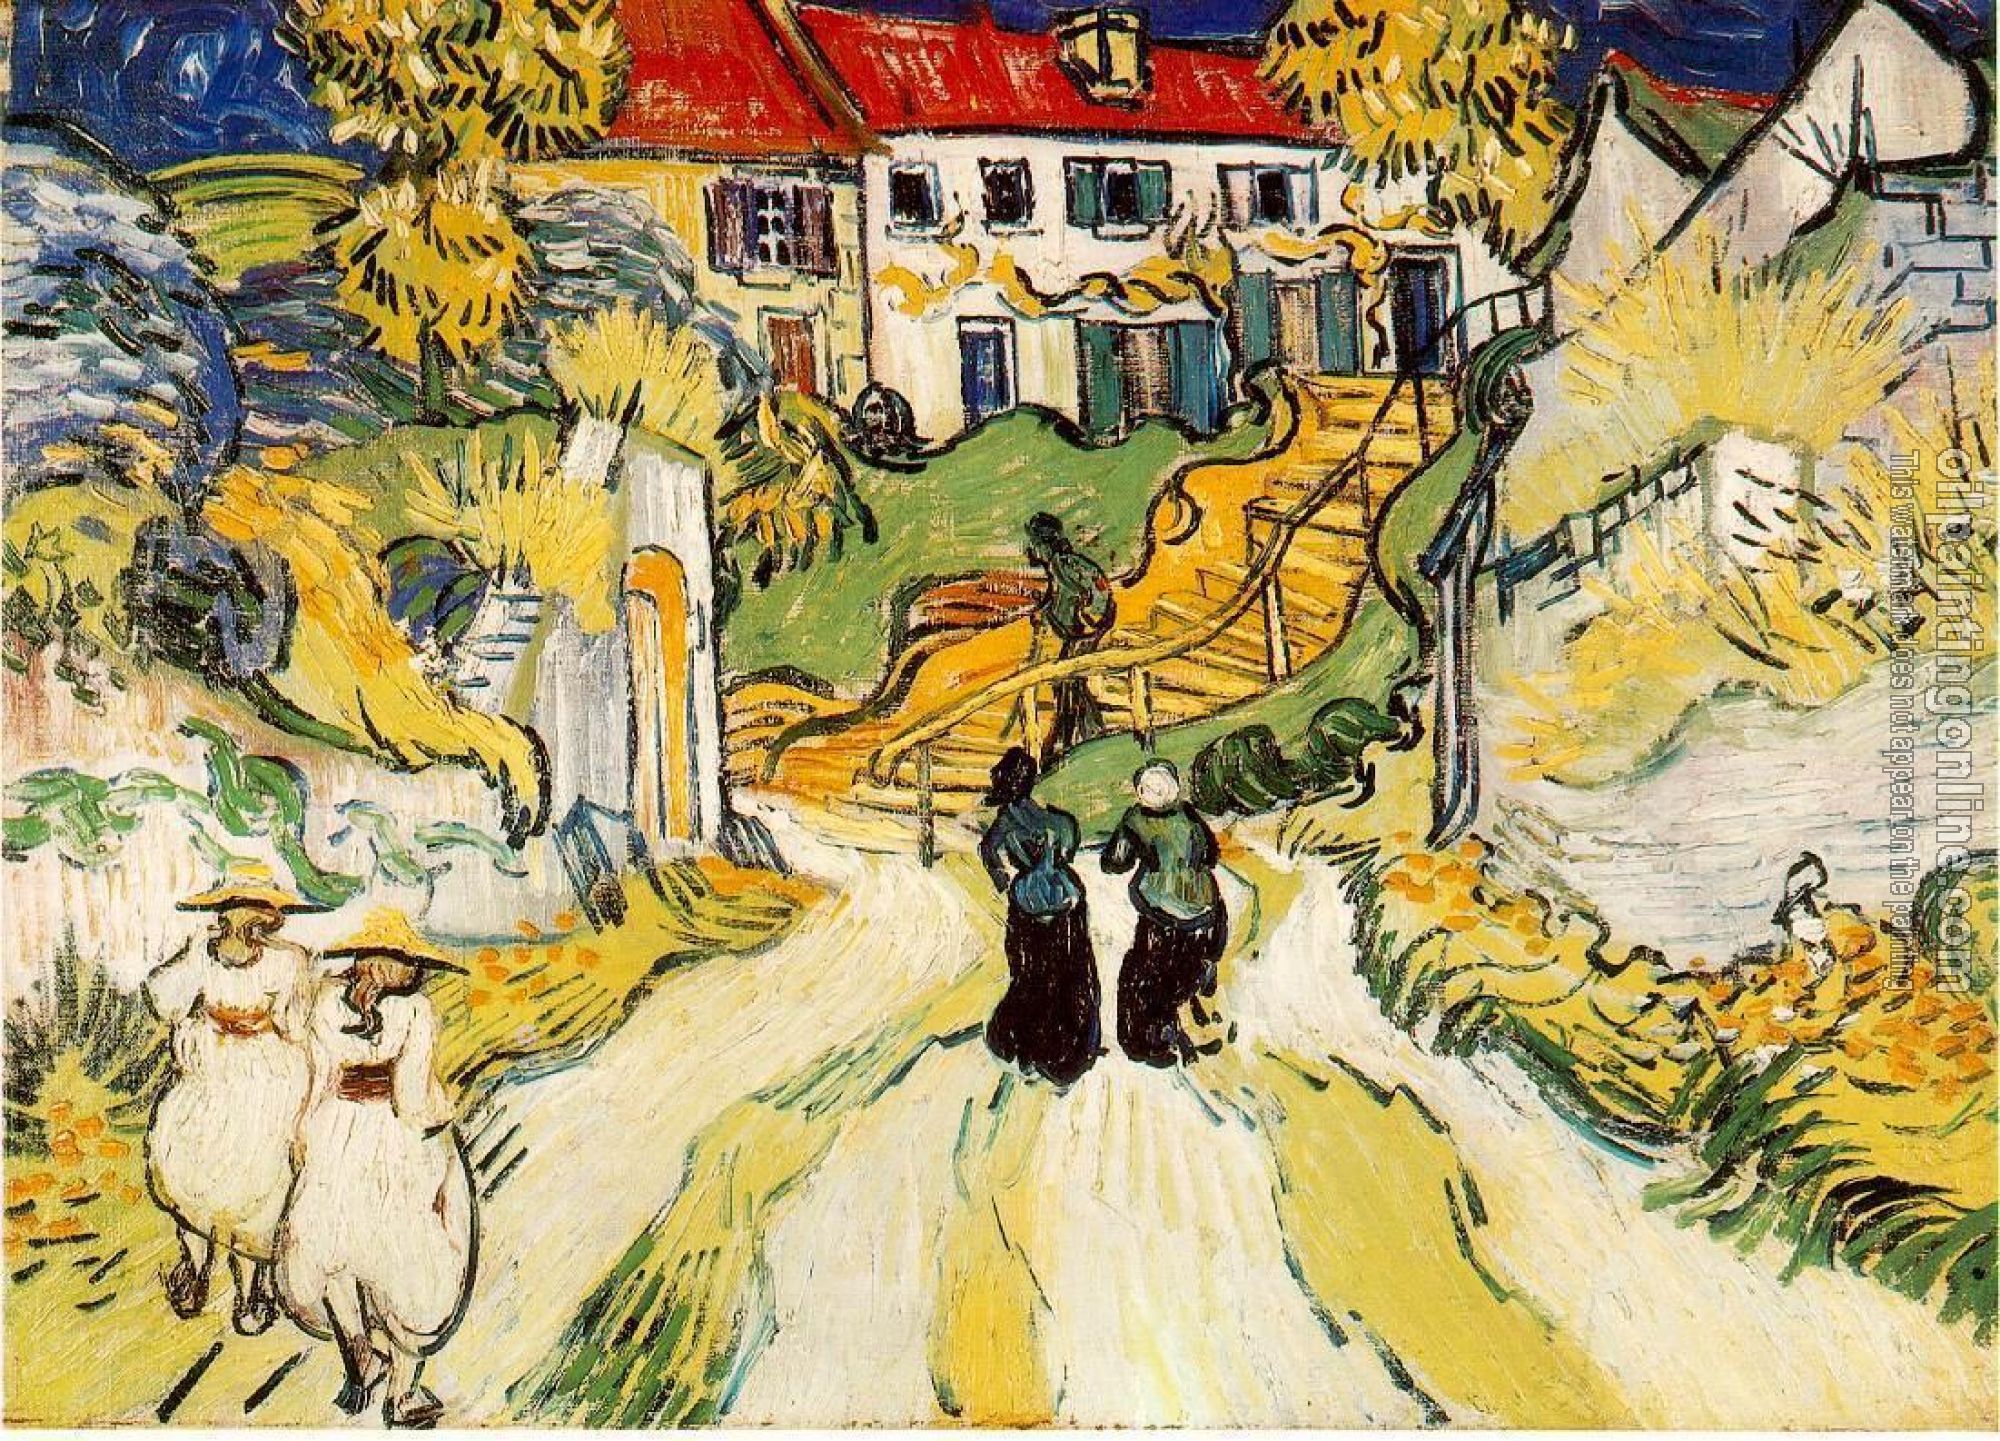 Gogh, Vincent van - Village Street and Stairs with Figures